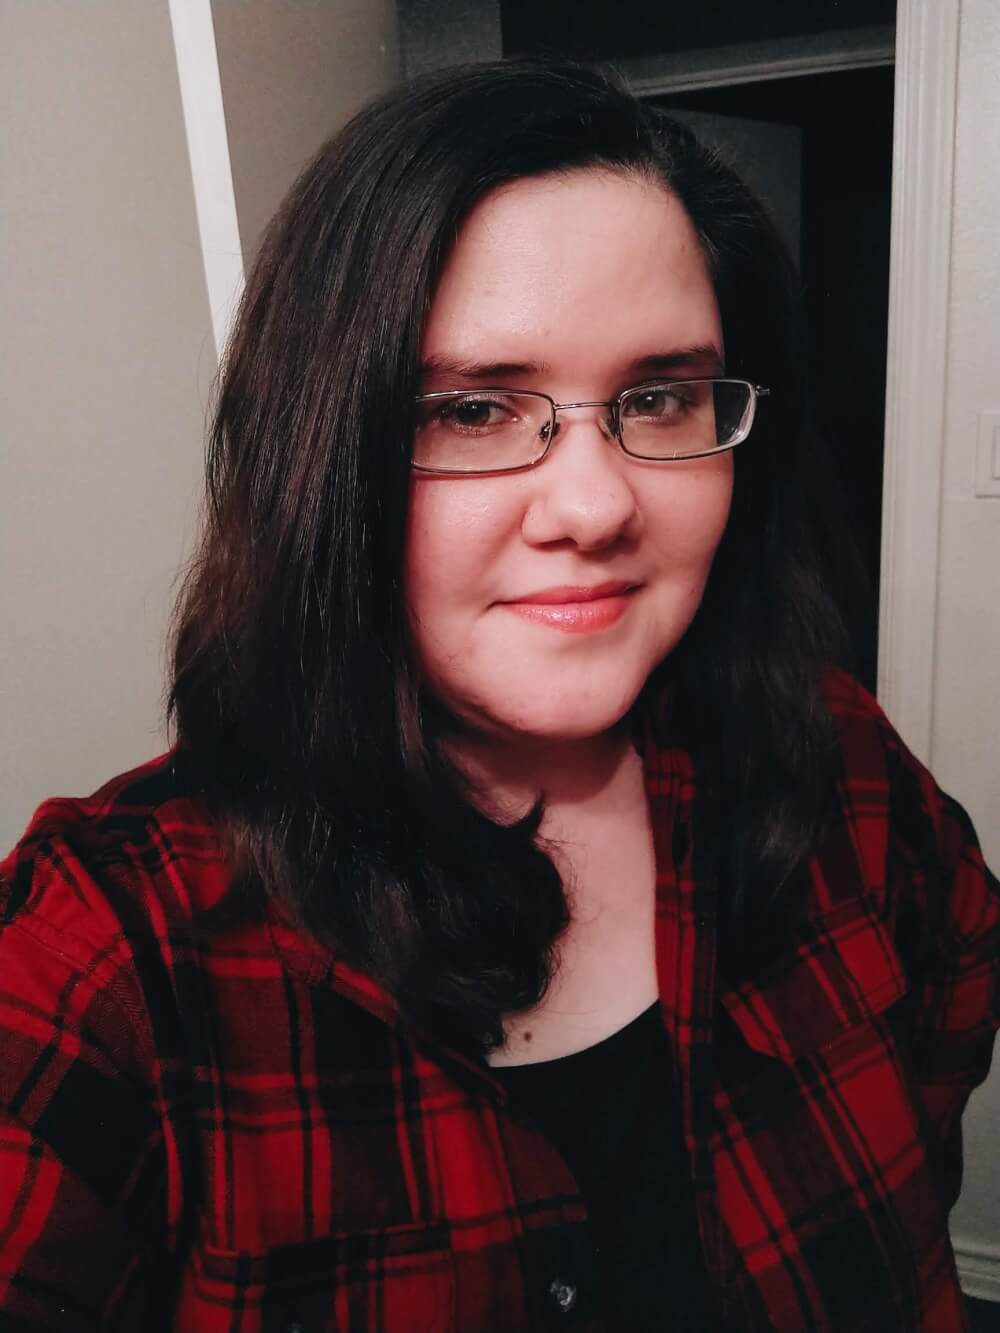 Selfie of me in glasses, a small smile, short hair, red plaid flannel